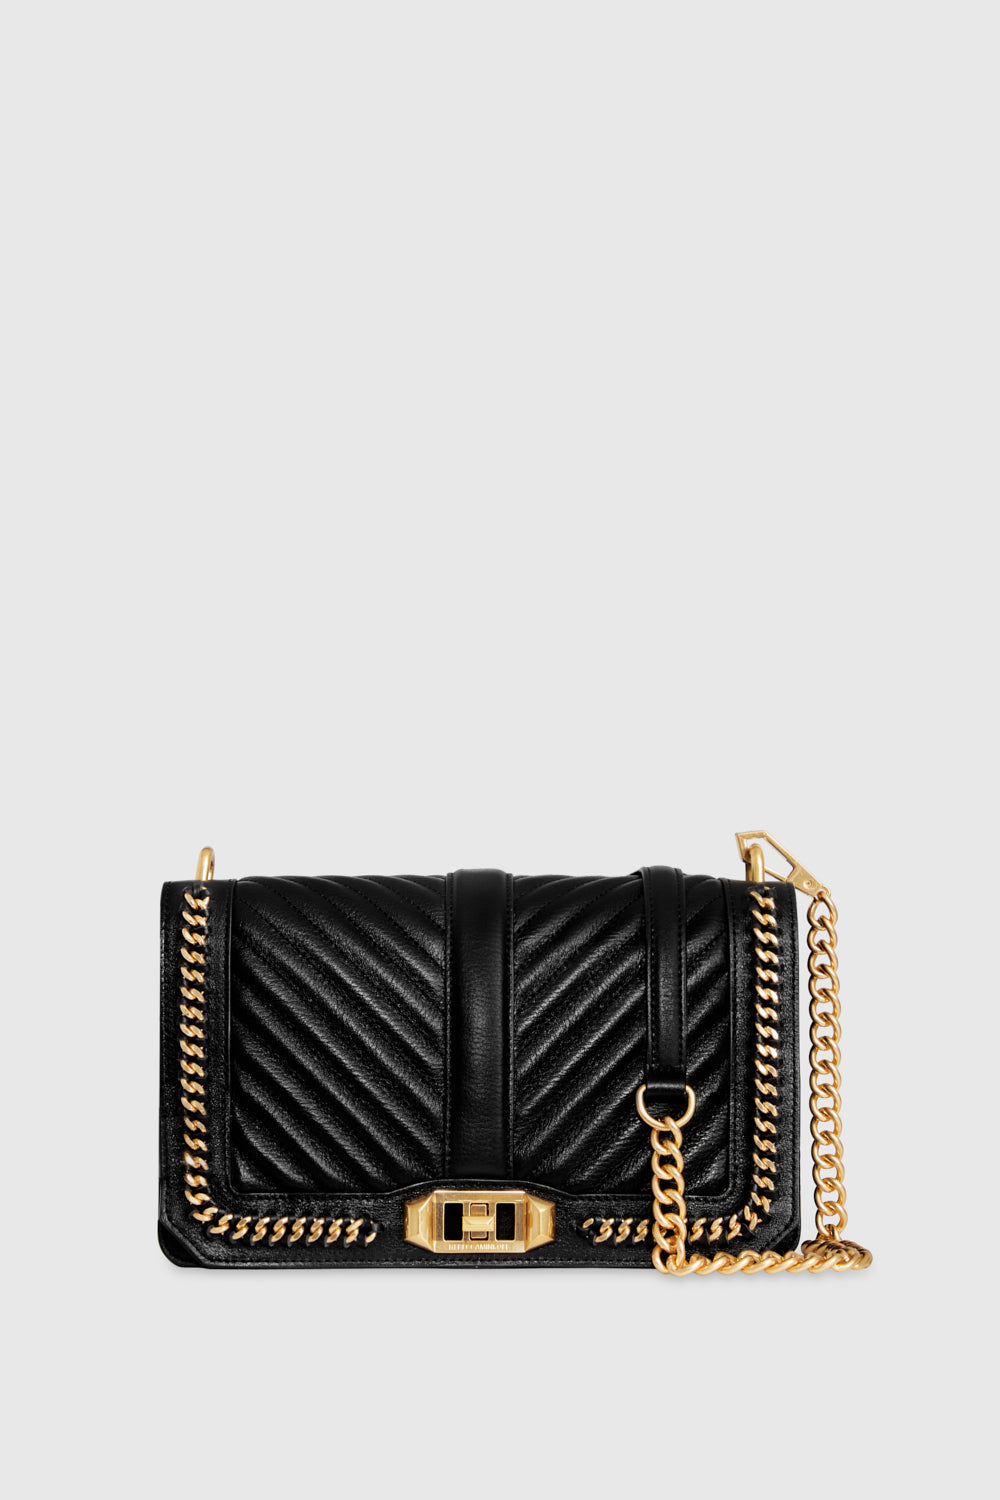 Rebecca Minkoff Chevron Quilted Love Crossbody With Chain Inset Bag In Black/Antique Brass